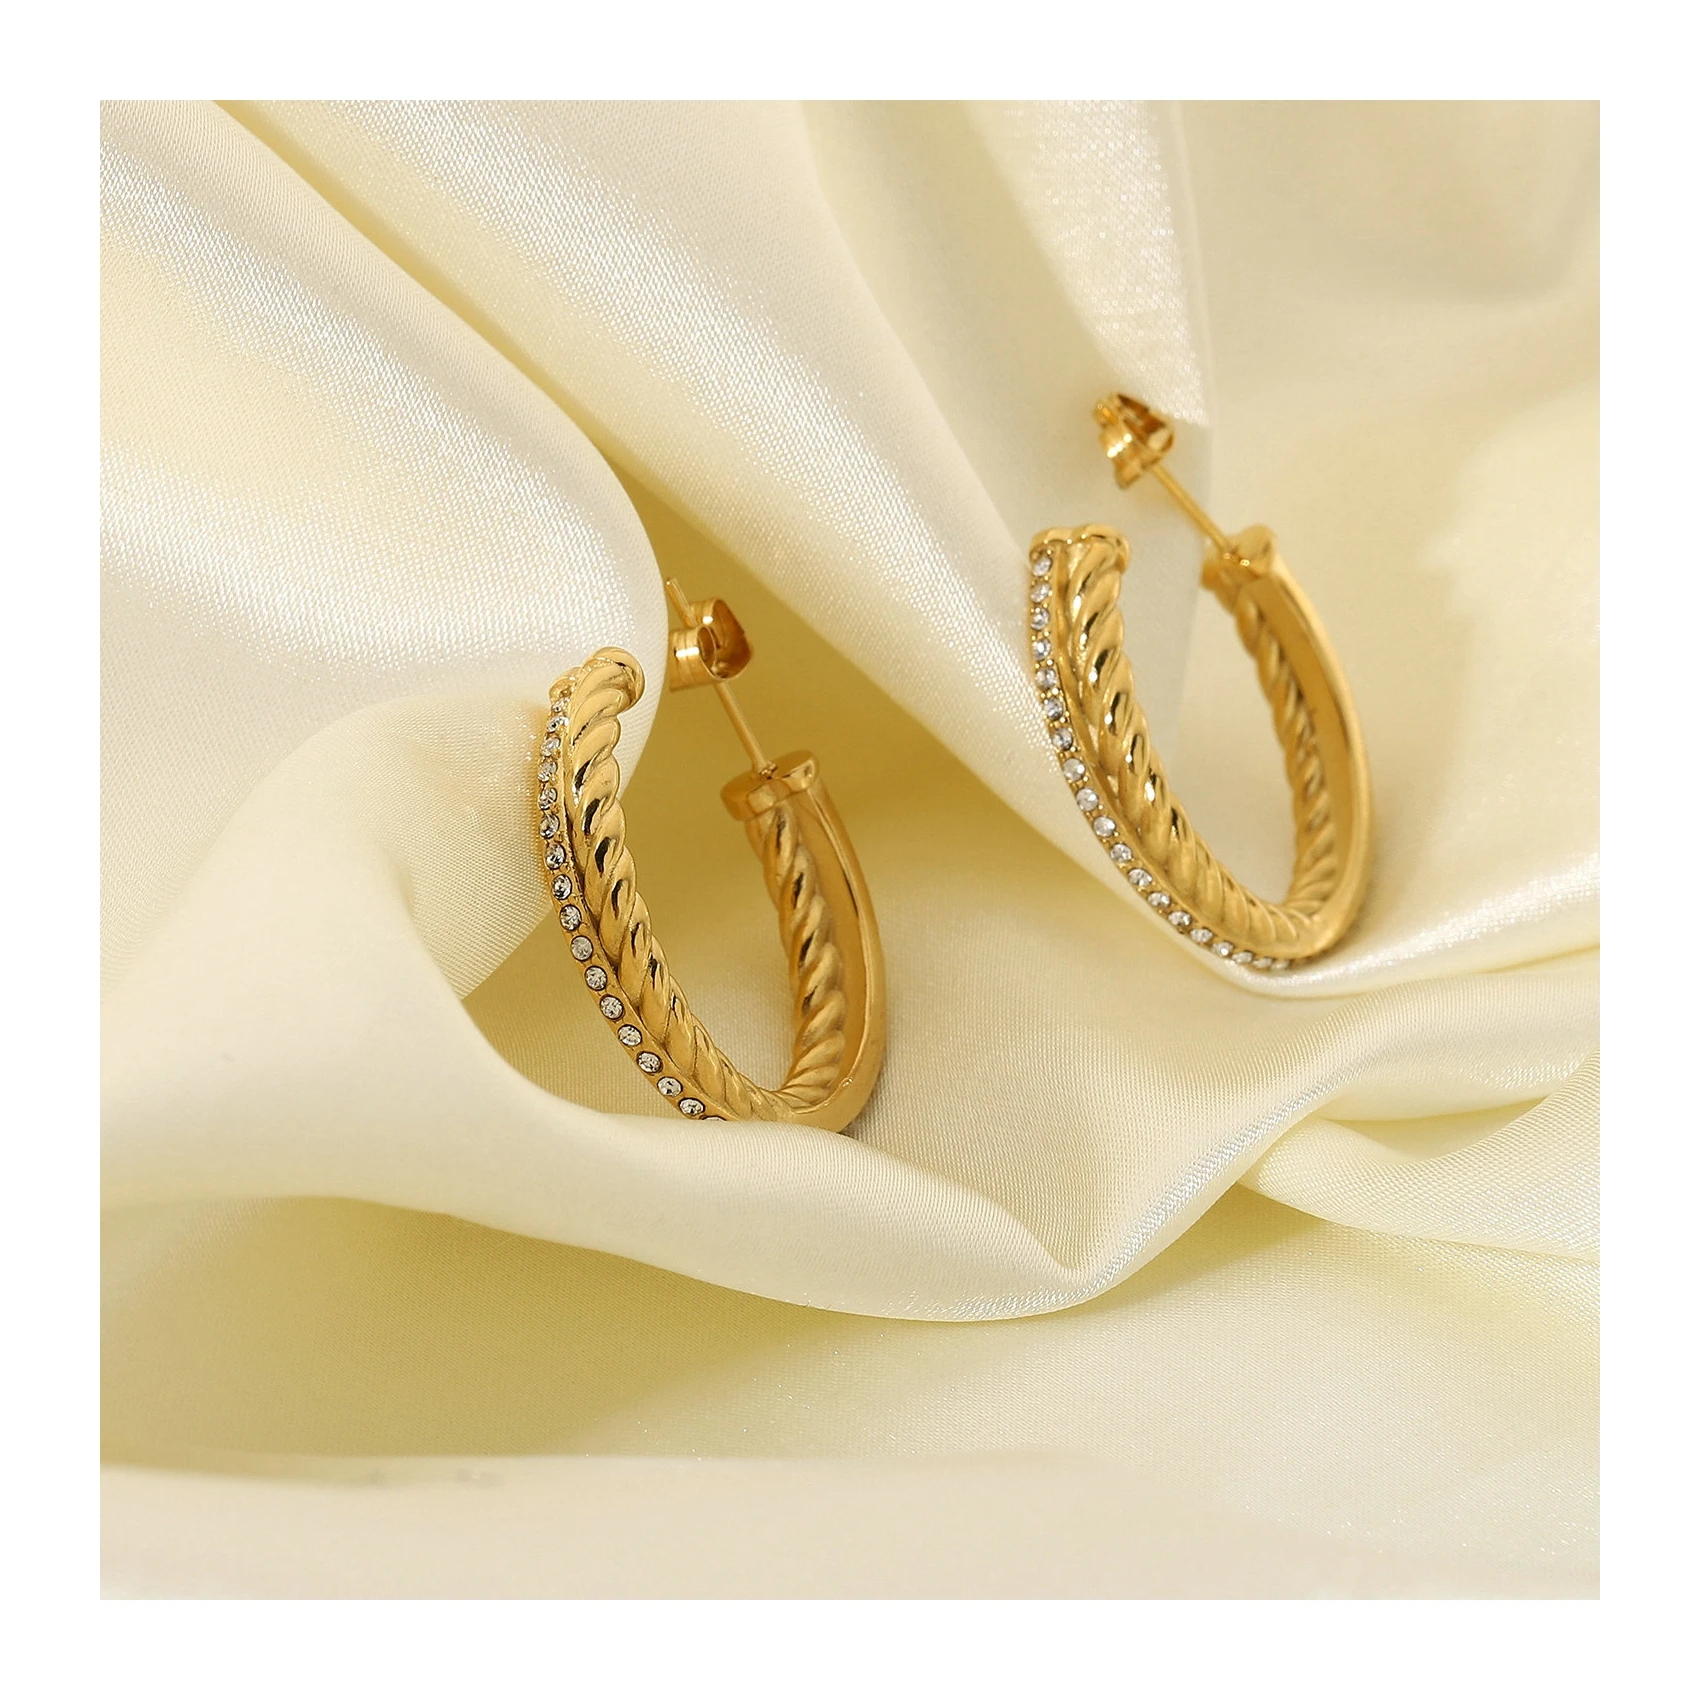 

New type allergy free jewelry 18k gold plated earring hoops stainless steel c-shaped smooth hollow earrings aesthetic 2021, As the picture shows